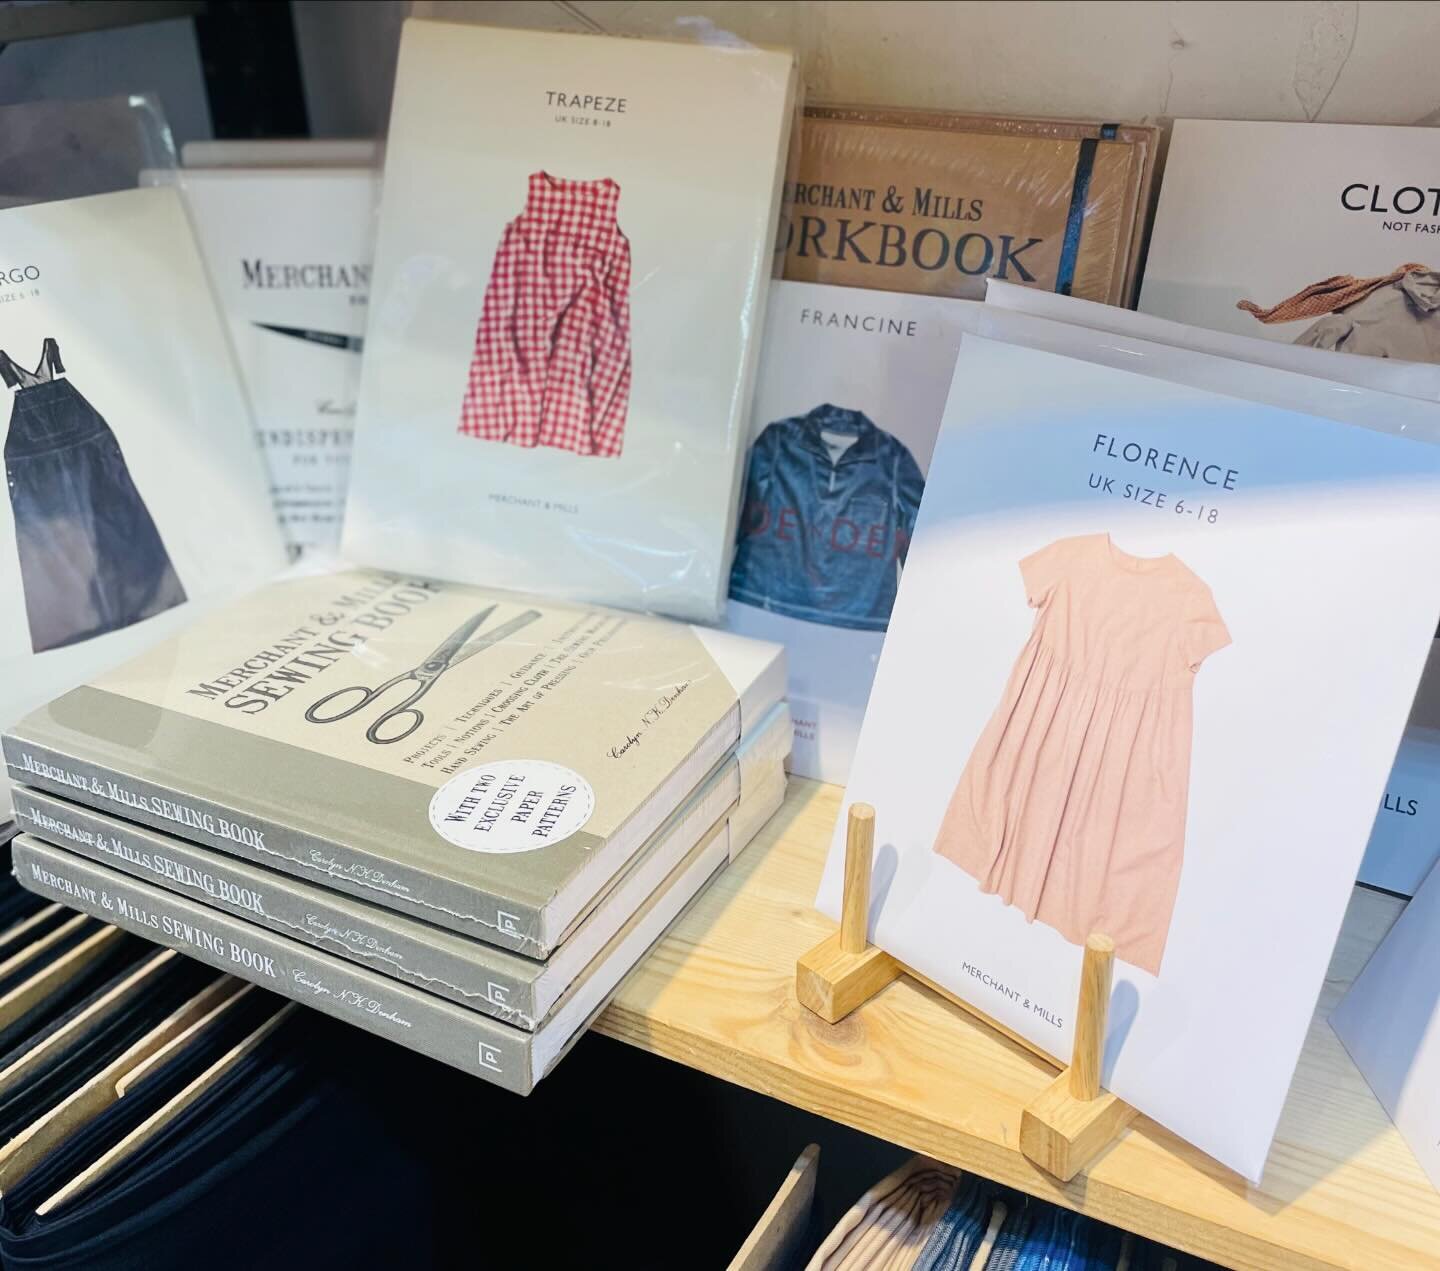 We have re-stocked our #merchantandmills sewing books and patterns and added new patterns too. Do check these out in-store! 
We are also in the process of adding the patterns on our website. 
.
.
#fabricitysg
#sewingprojects